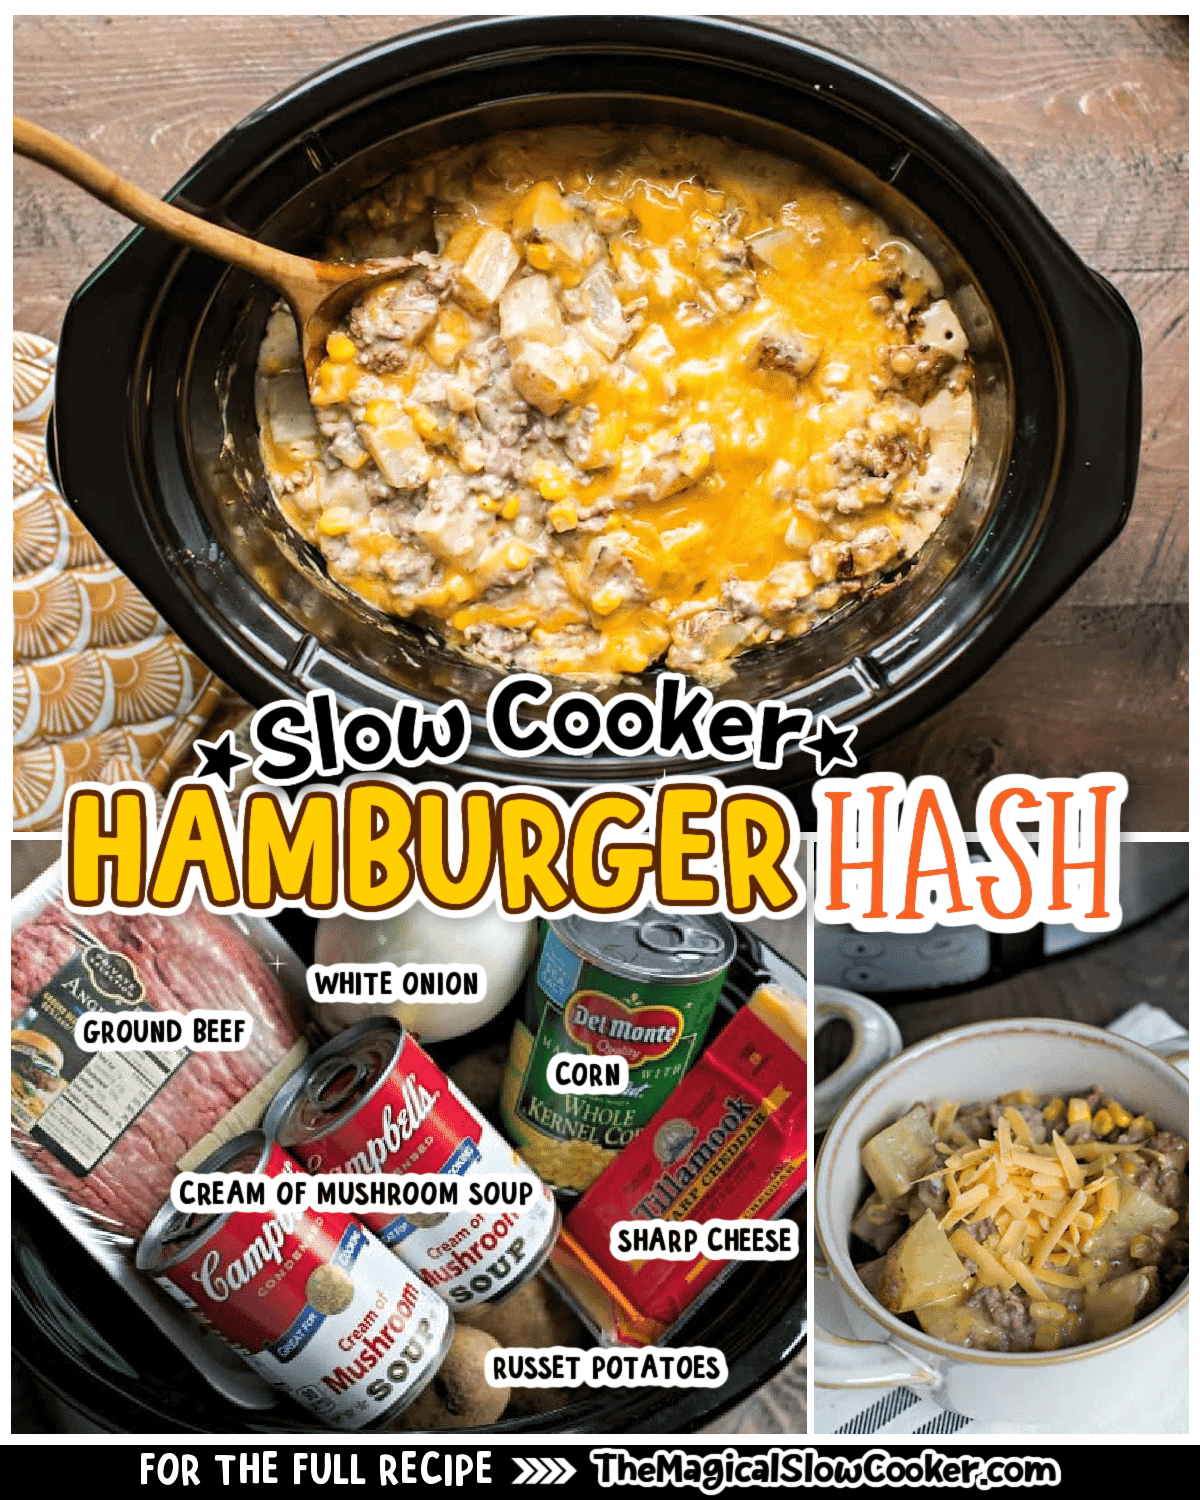 Images of hamburger hash with text overlay of what the ingredients are.